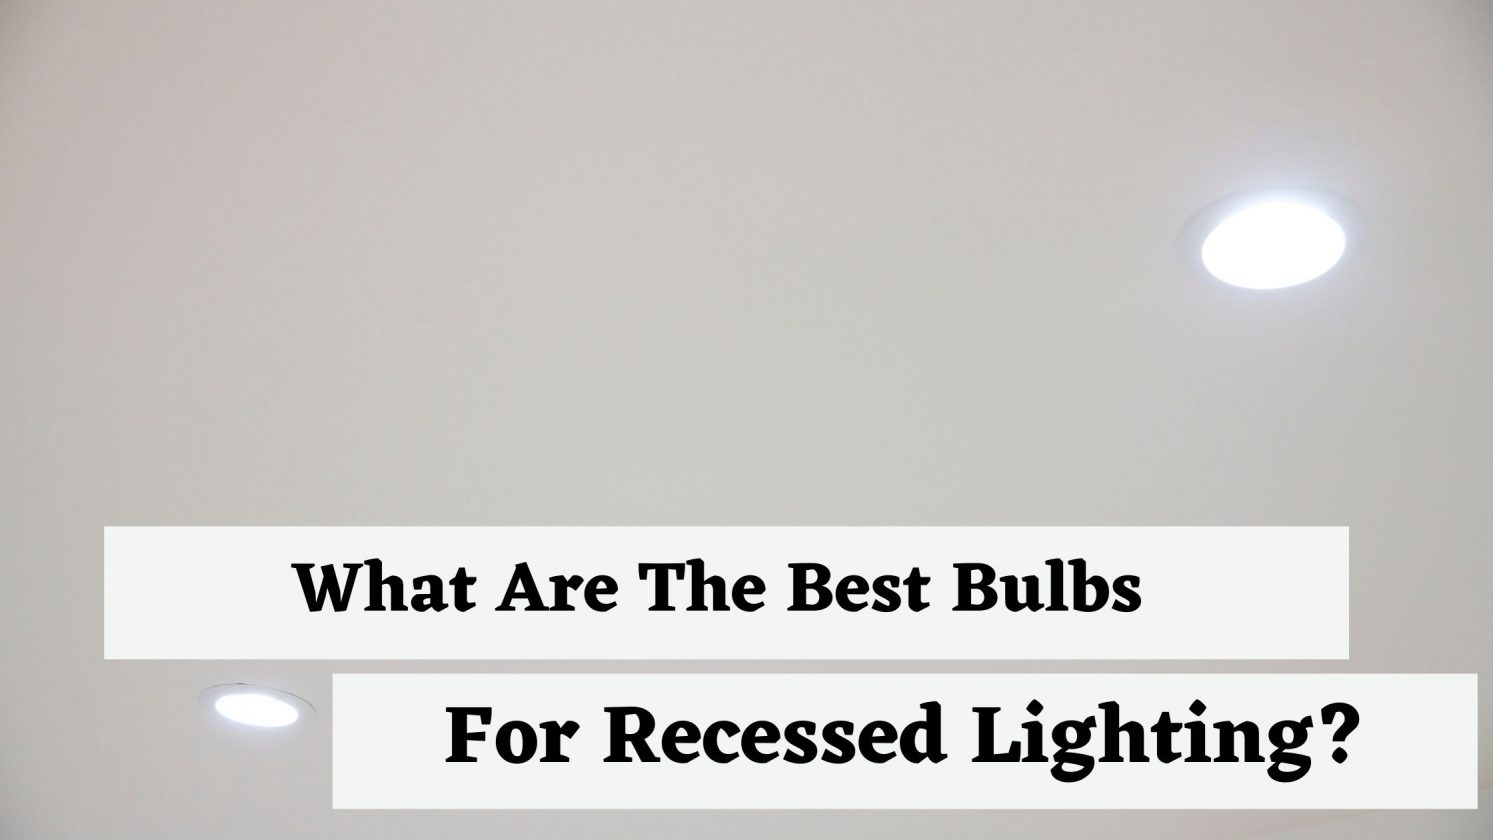 What Are The Best Bulbs For Recessed Lighting?